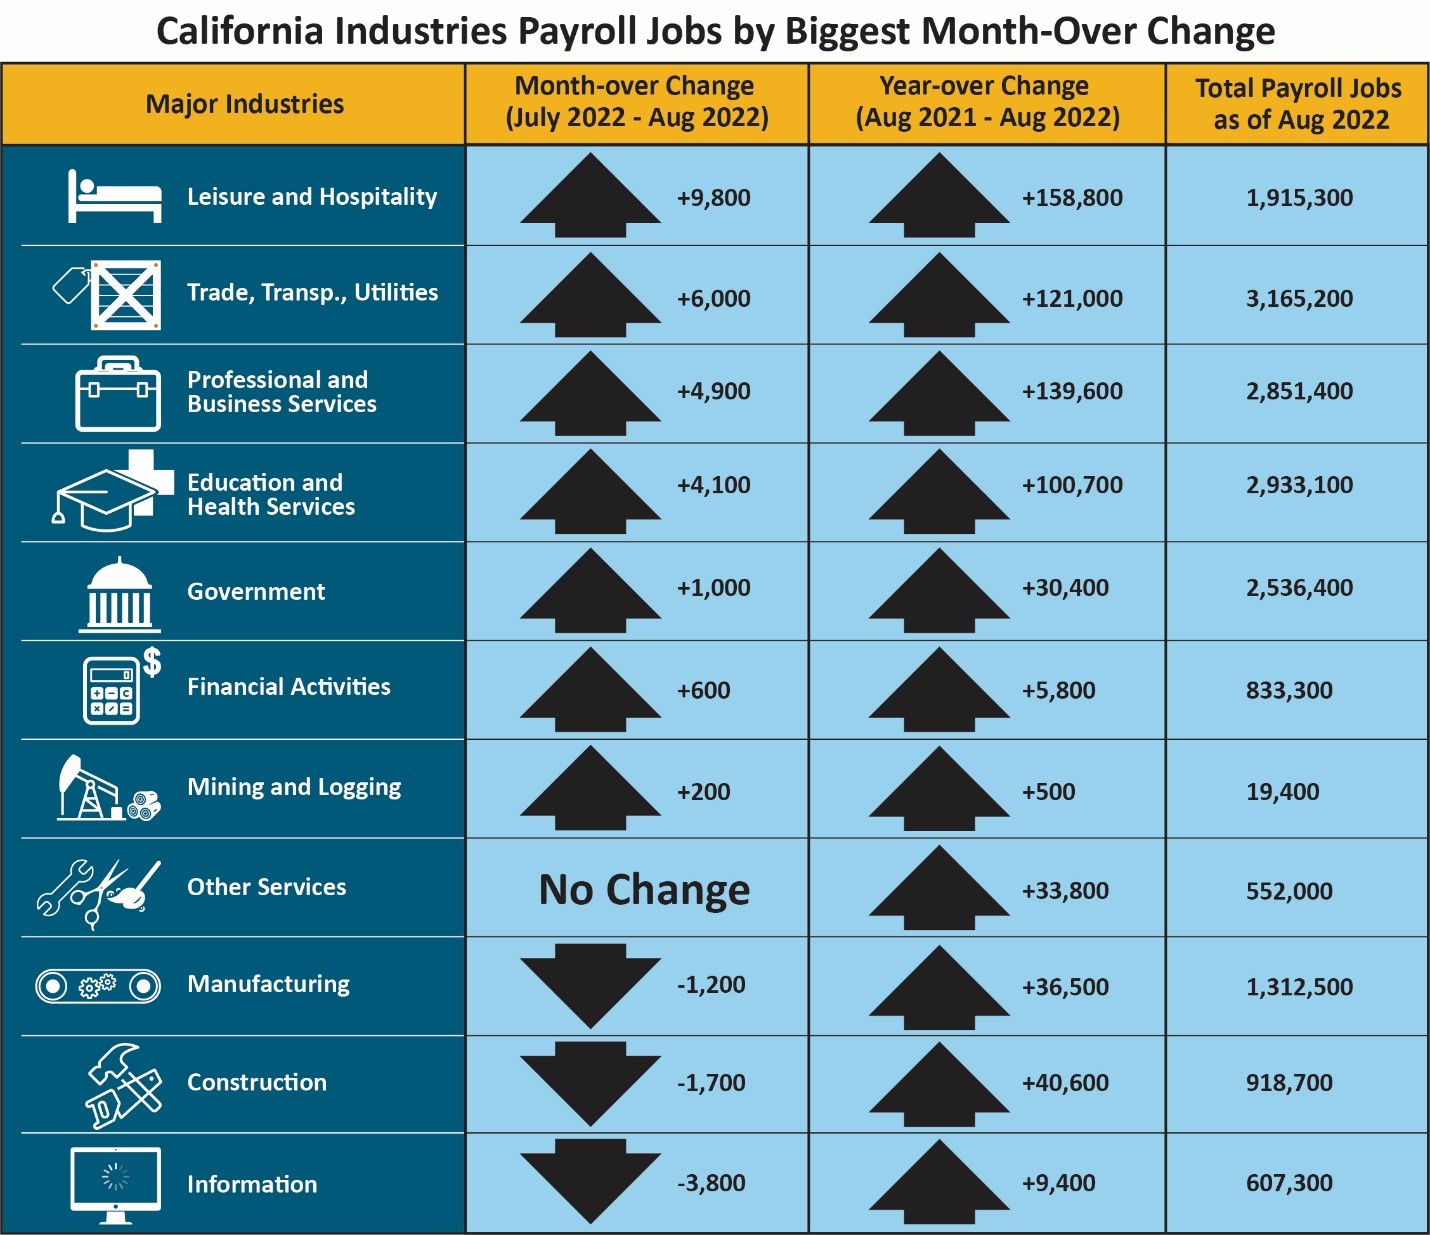 This table shows the number of California nonfarm payroll jobs grouped by major industries, with columns showing month-over and year-over change, plus total payroll jobs as of August 2022. If you need an alternative format to access this information, contact the EDD Equal Employment Opportunity Office at EEOmail@edd.ca.gov or call toll free 1-866-490-8879. 